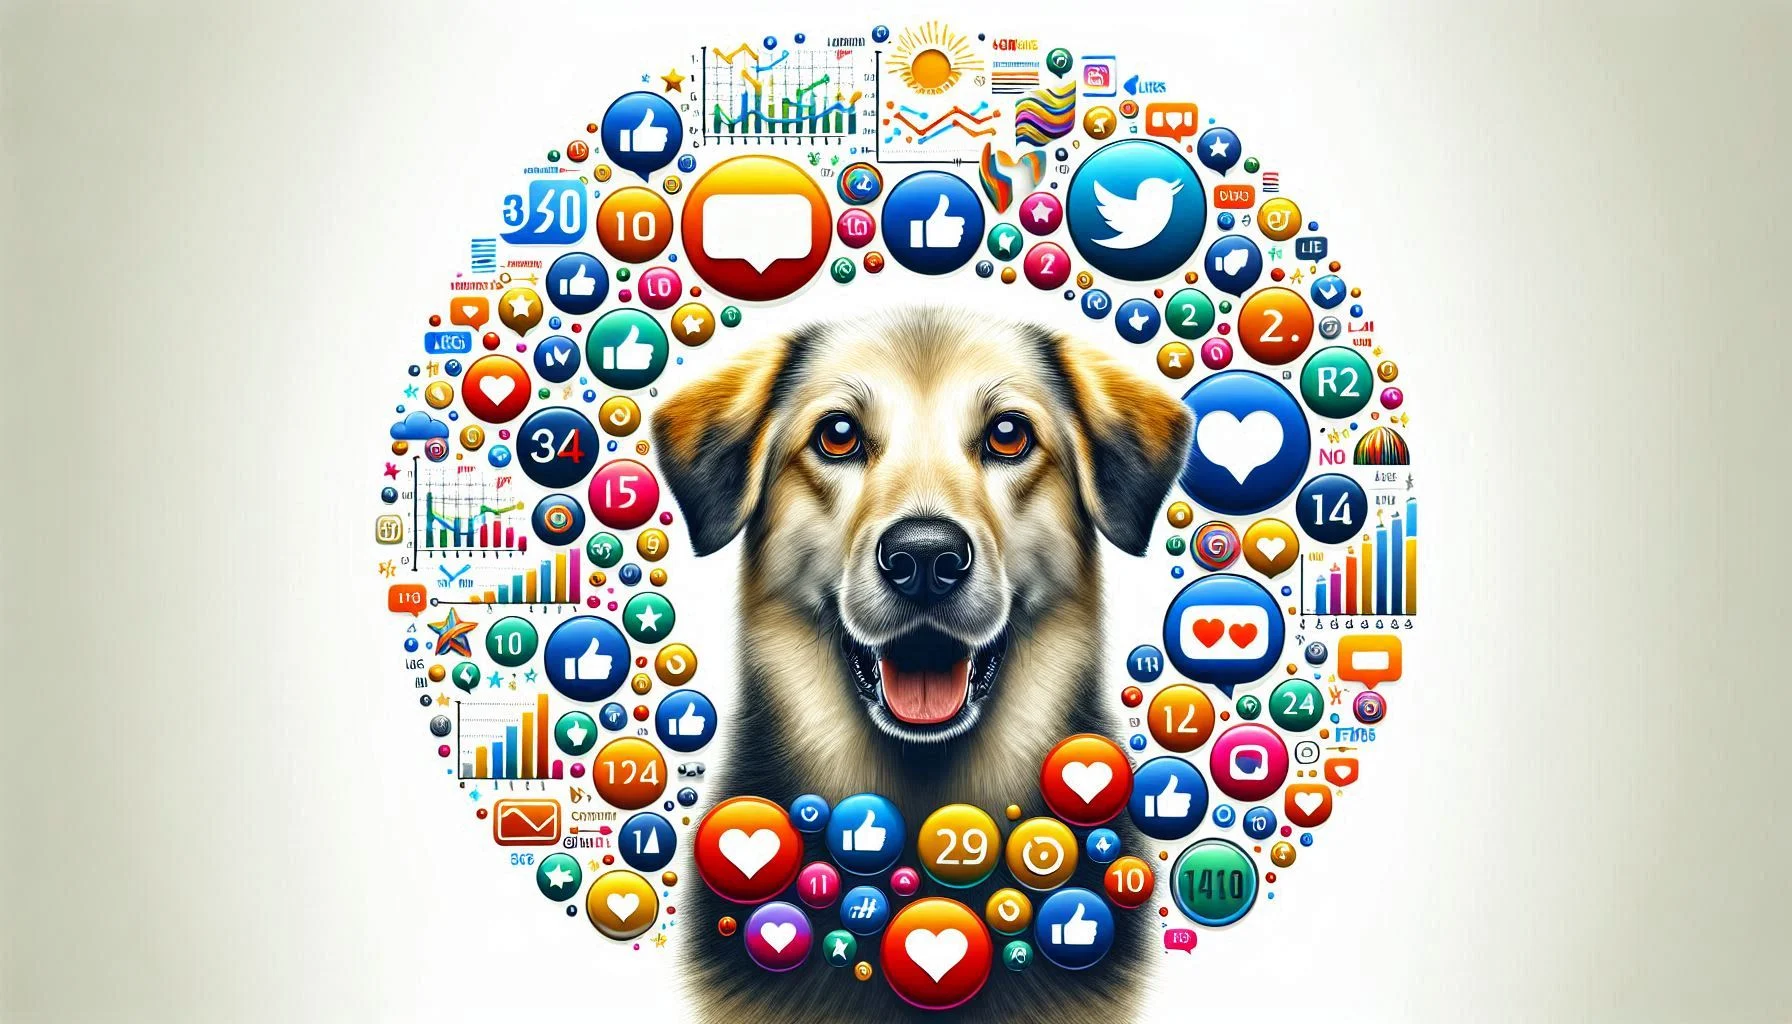 Dog surrounded by social media icons and engagement metrics